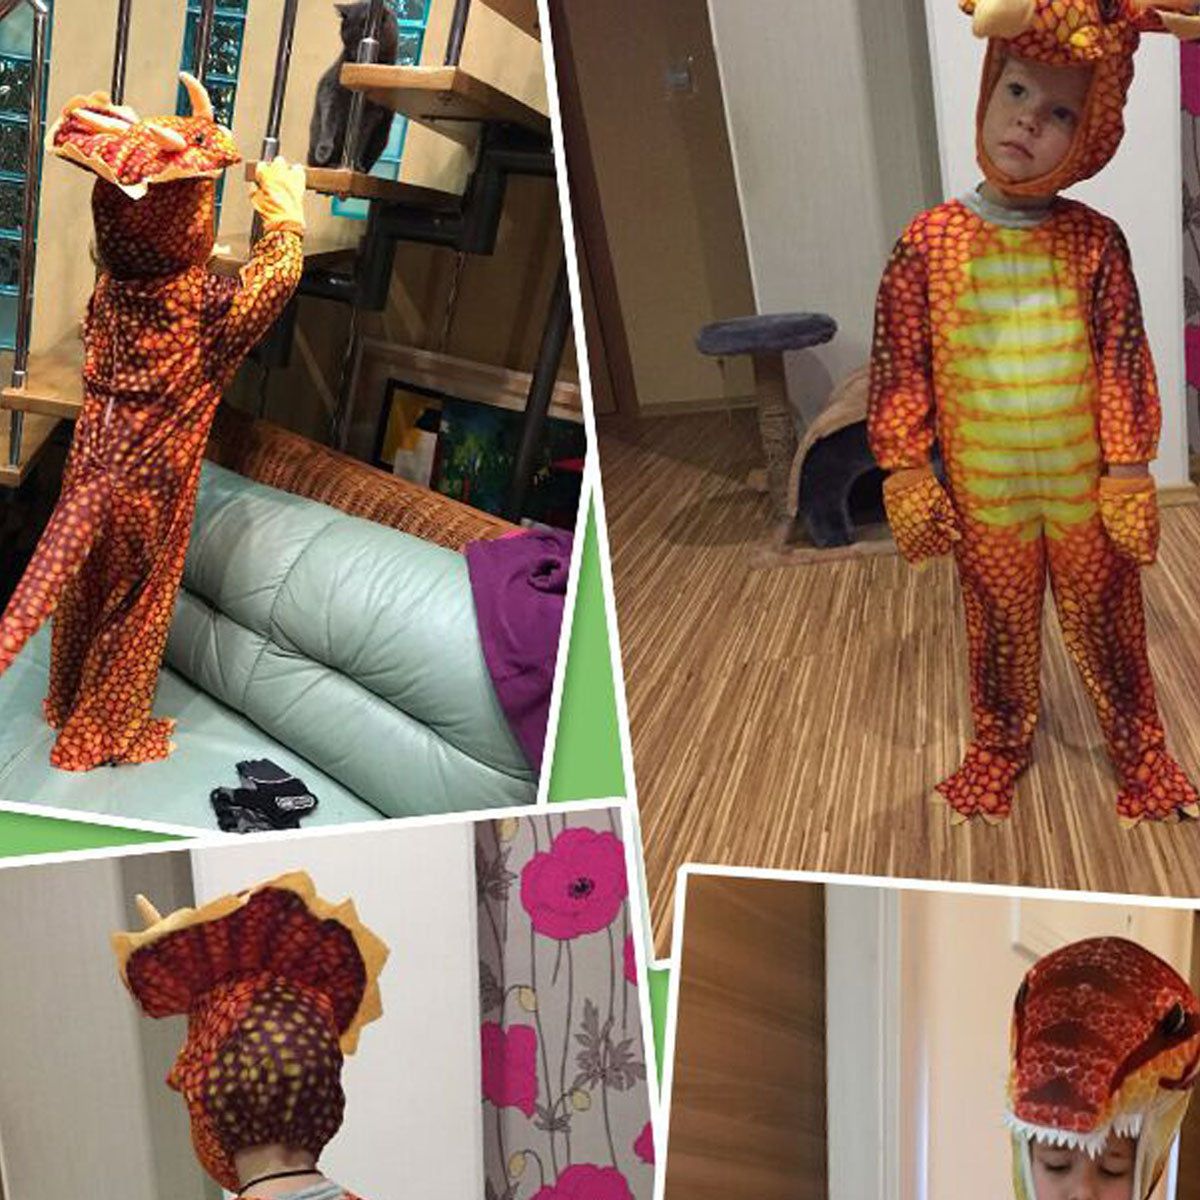 Kids Triceratops Costume Jurassic Tyrannosaurus Rex Dress Fancy Dinosaur Outfit for Halloween Party